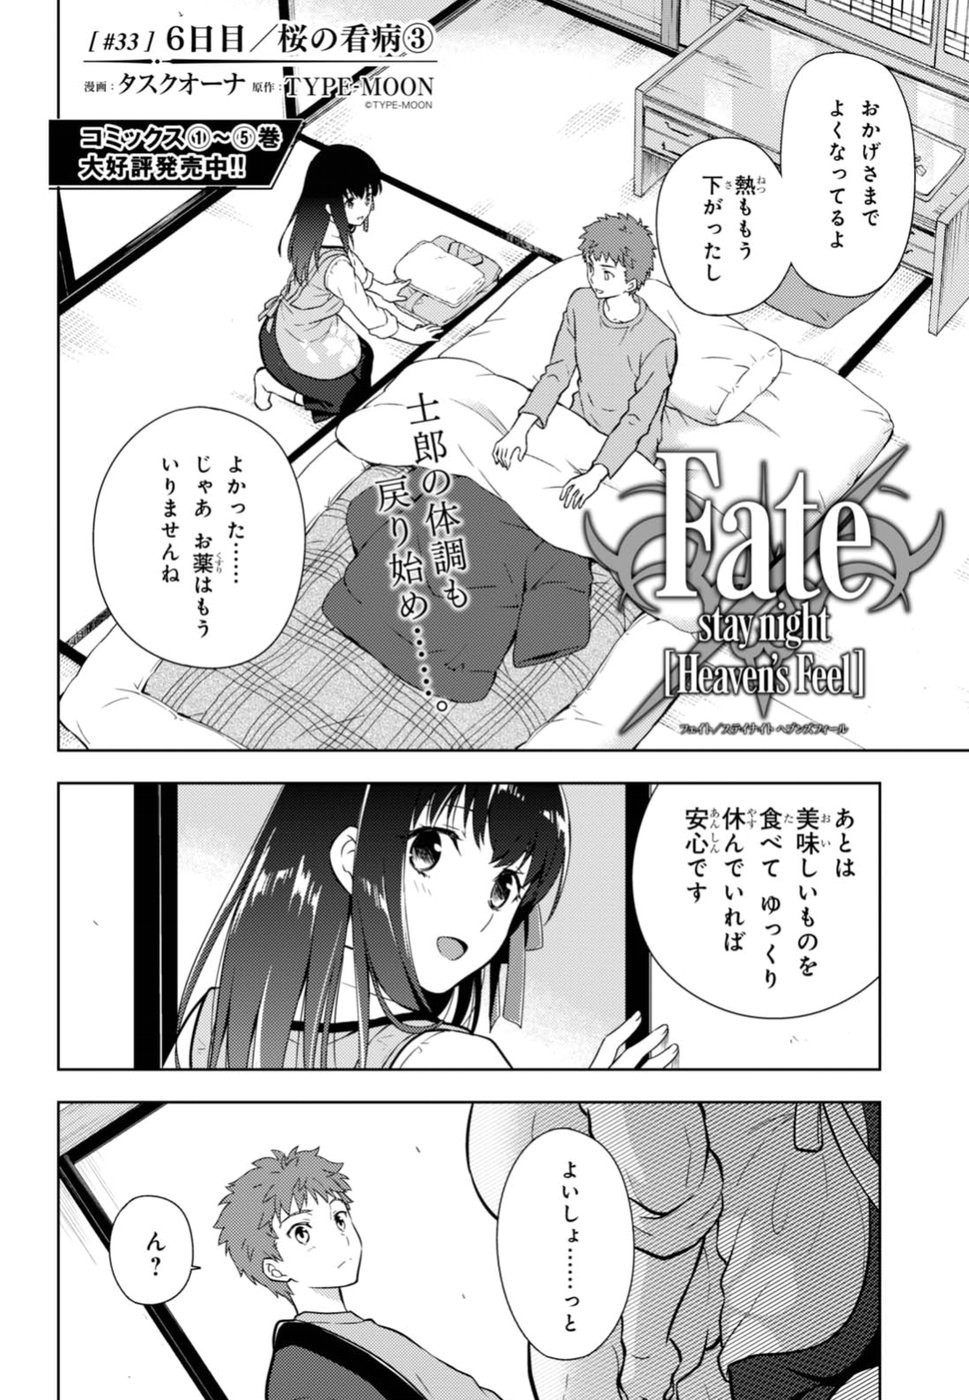 Fate/Stay night Heaven's Feel - Chapter 33 - Page 2